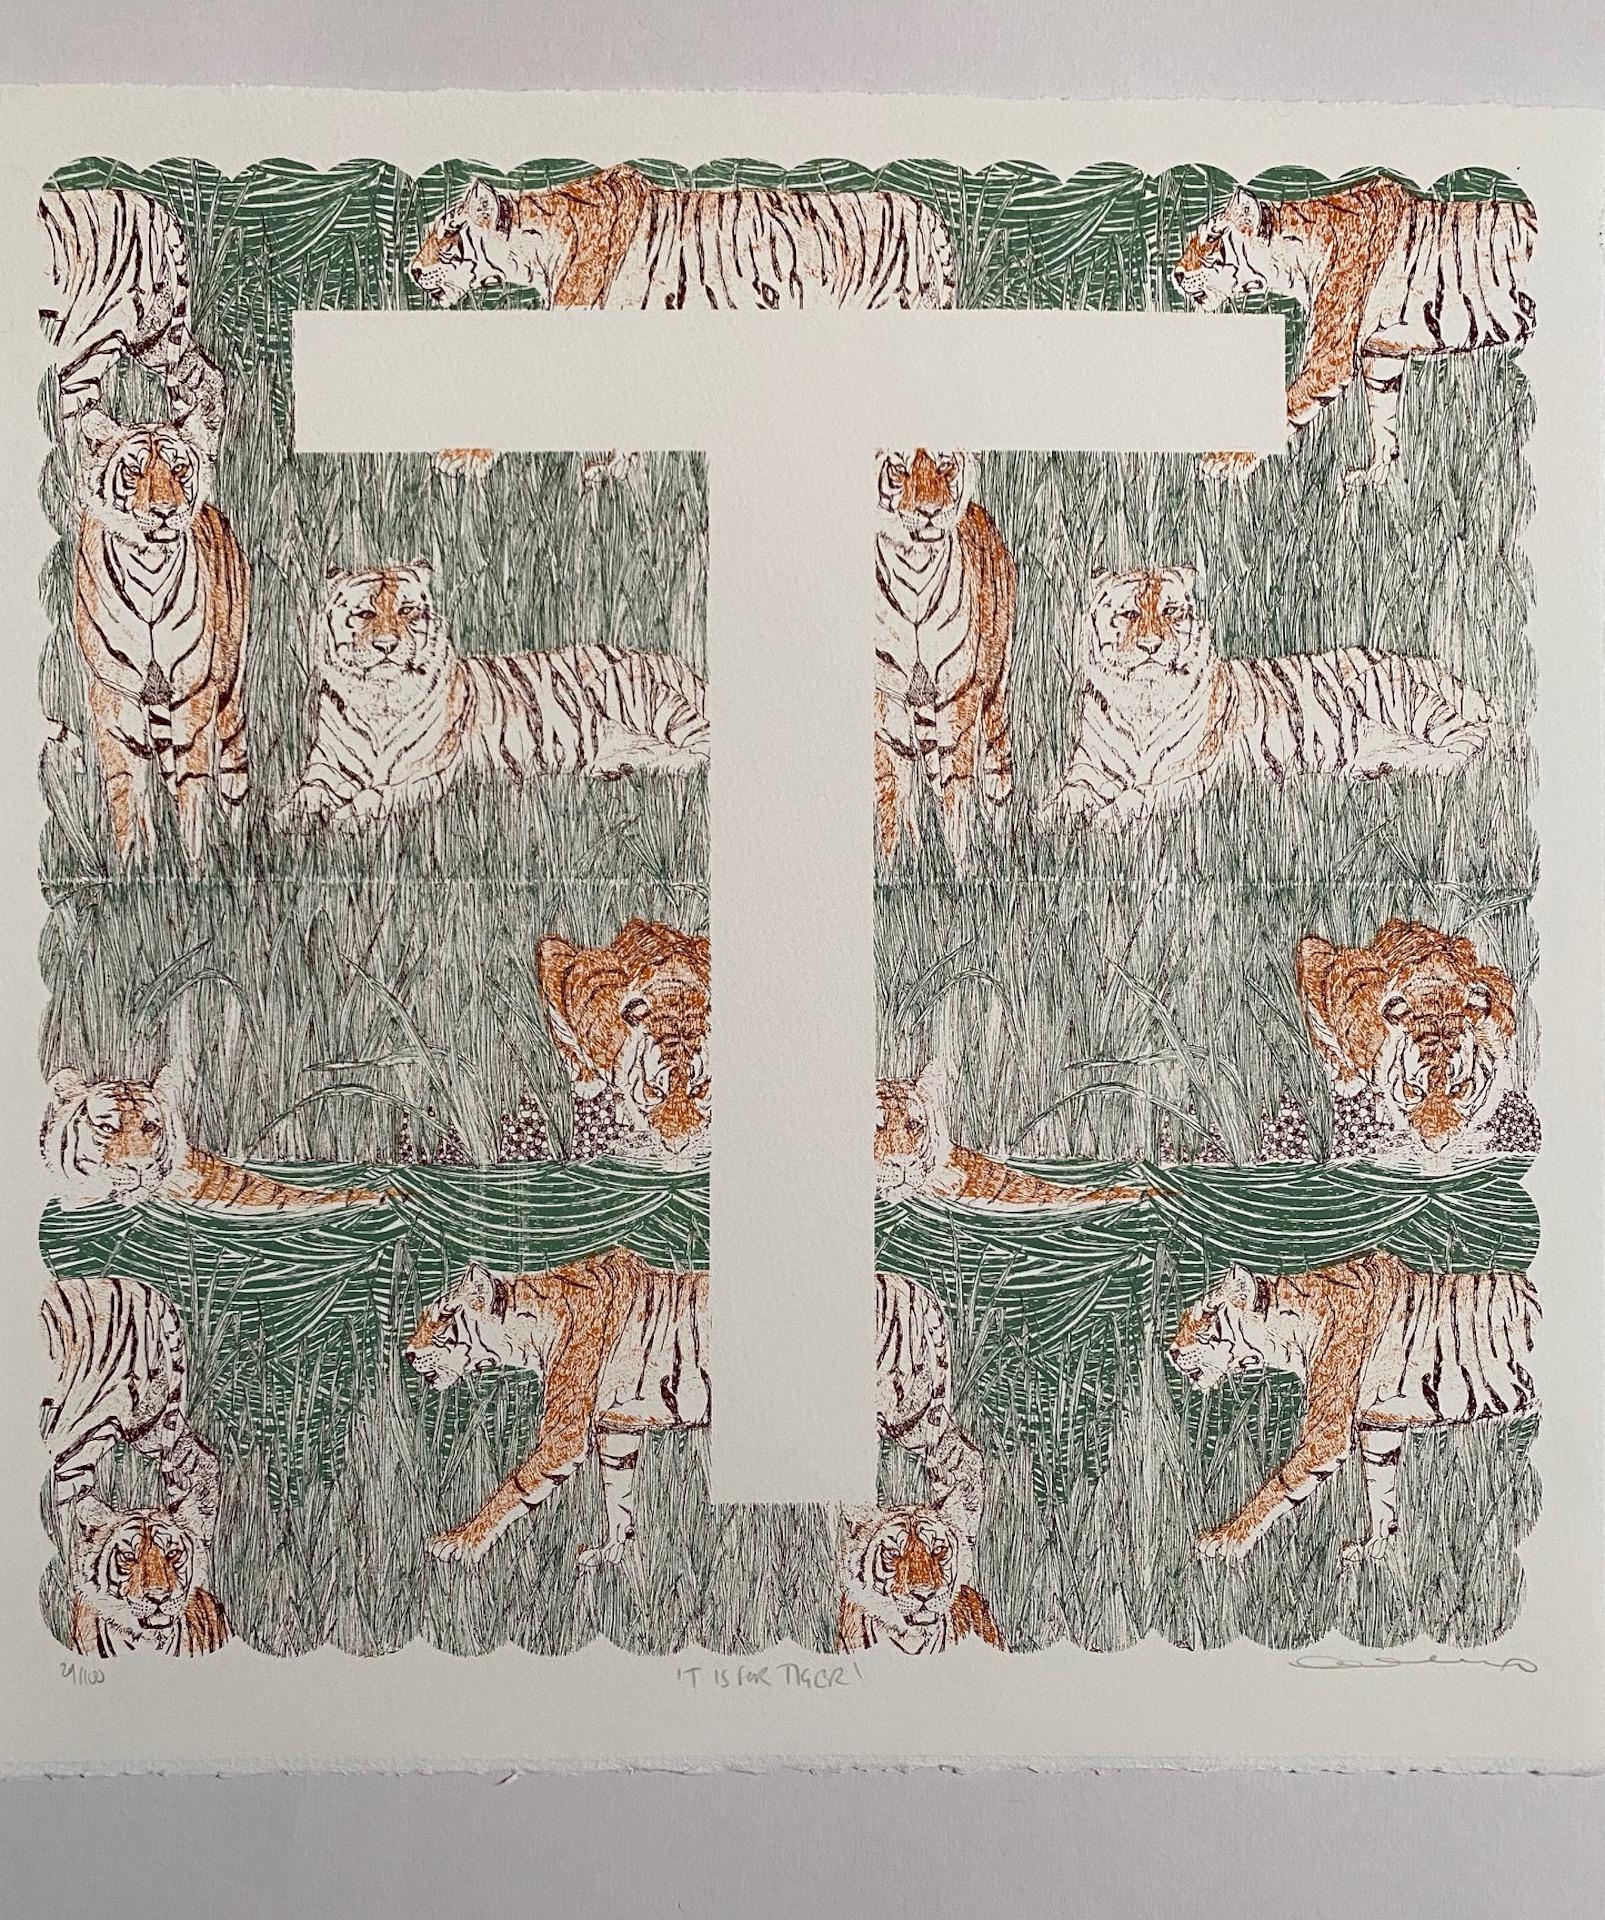 Clare Halifax
T is for Tiger
Limited Edition 3 colour screen print
Edition of 100
Sheet Size: H 38cm x W 37cm x 0.1cm
Sold Unframed
Hand printed by the artist onto somerset satin paper 300gms with deckle edge.
Please Note that in situ images are